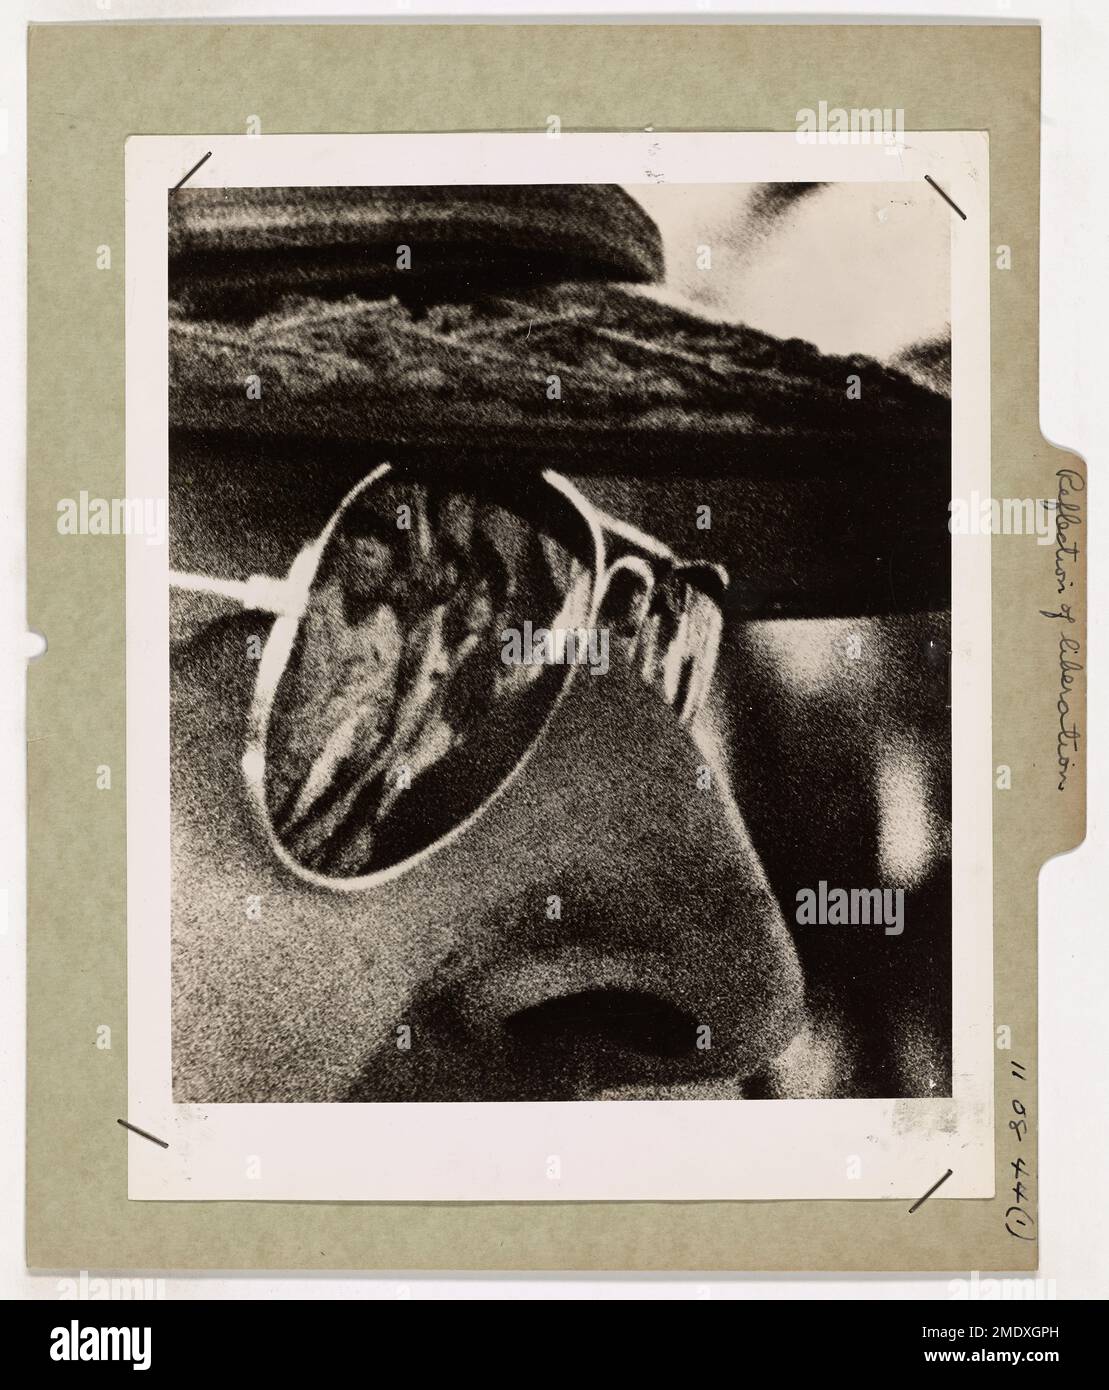 Photograph of Reflection in General MacArthur's Glasses. Reflection of Liberation. Reflected in General MacArthur's glasses are figures of the Filipino natives greeting his return joyously on the beach of Leyte Island after the island had been under Jap oppression for nearly three years. This enlargement of a closeup photo of MacArthur was made by a Coast Guard Combat Photographer who held his camera on the general for ten minutes waiting for the exact instant to snap this remarkable picture. General MacArthur was standing on Leyte's beach soon after landing to keep his famous 'I Shall Return' Stock Photo